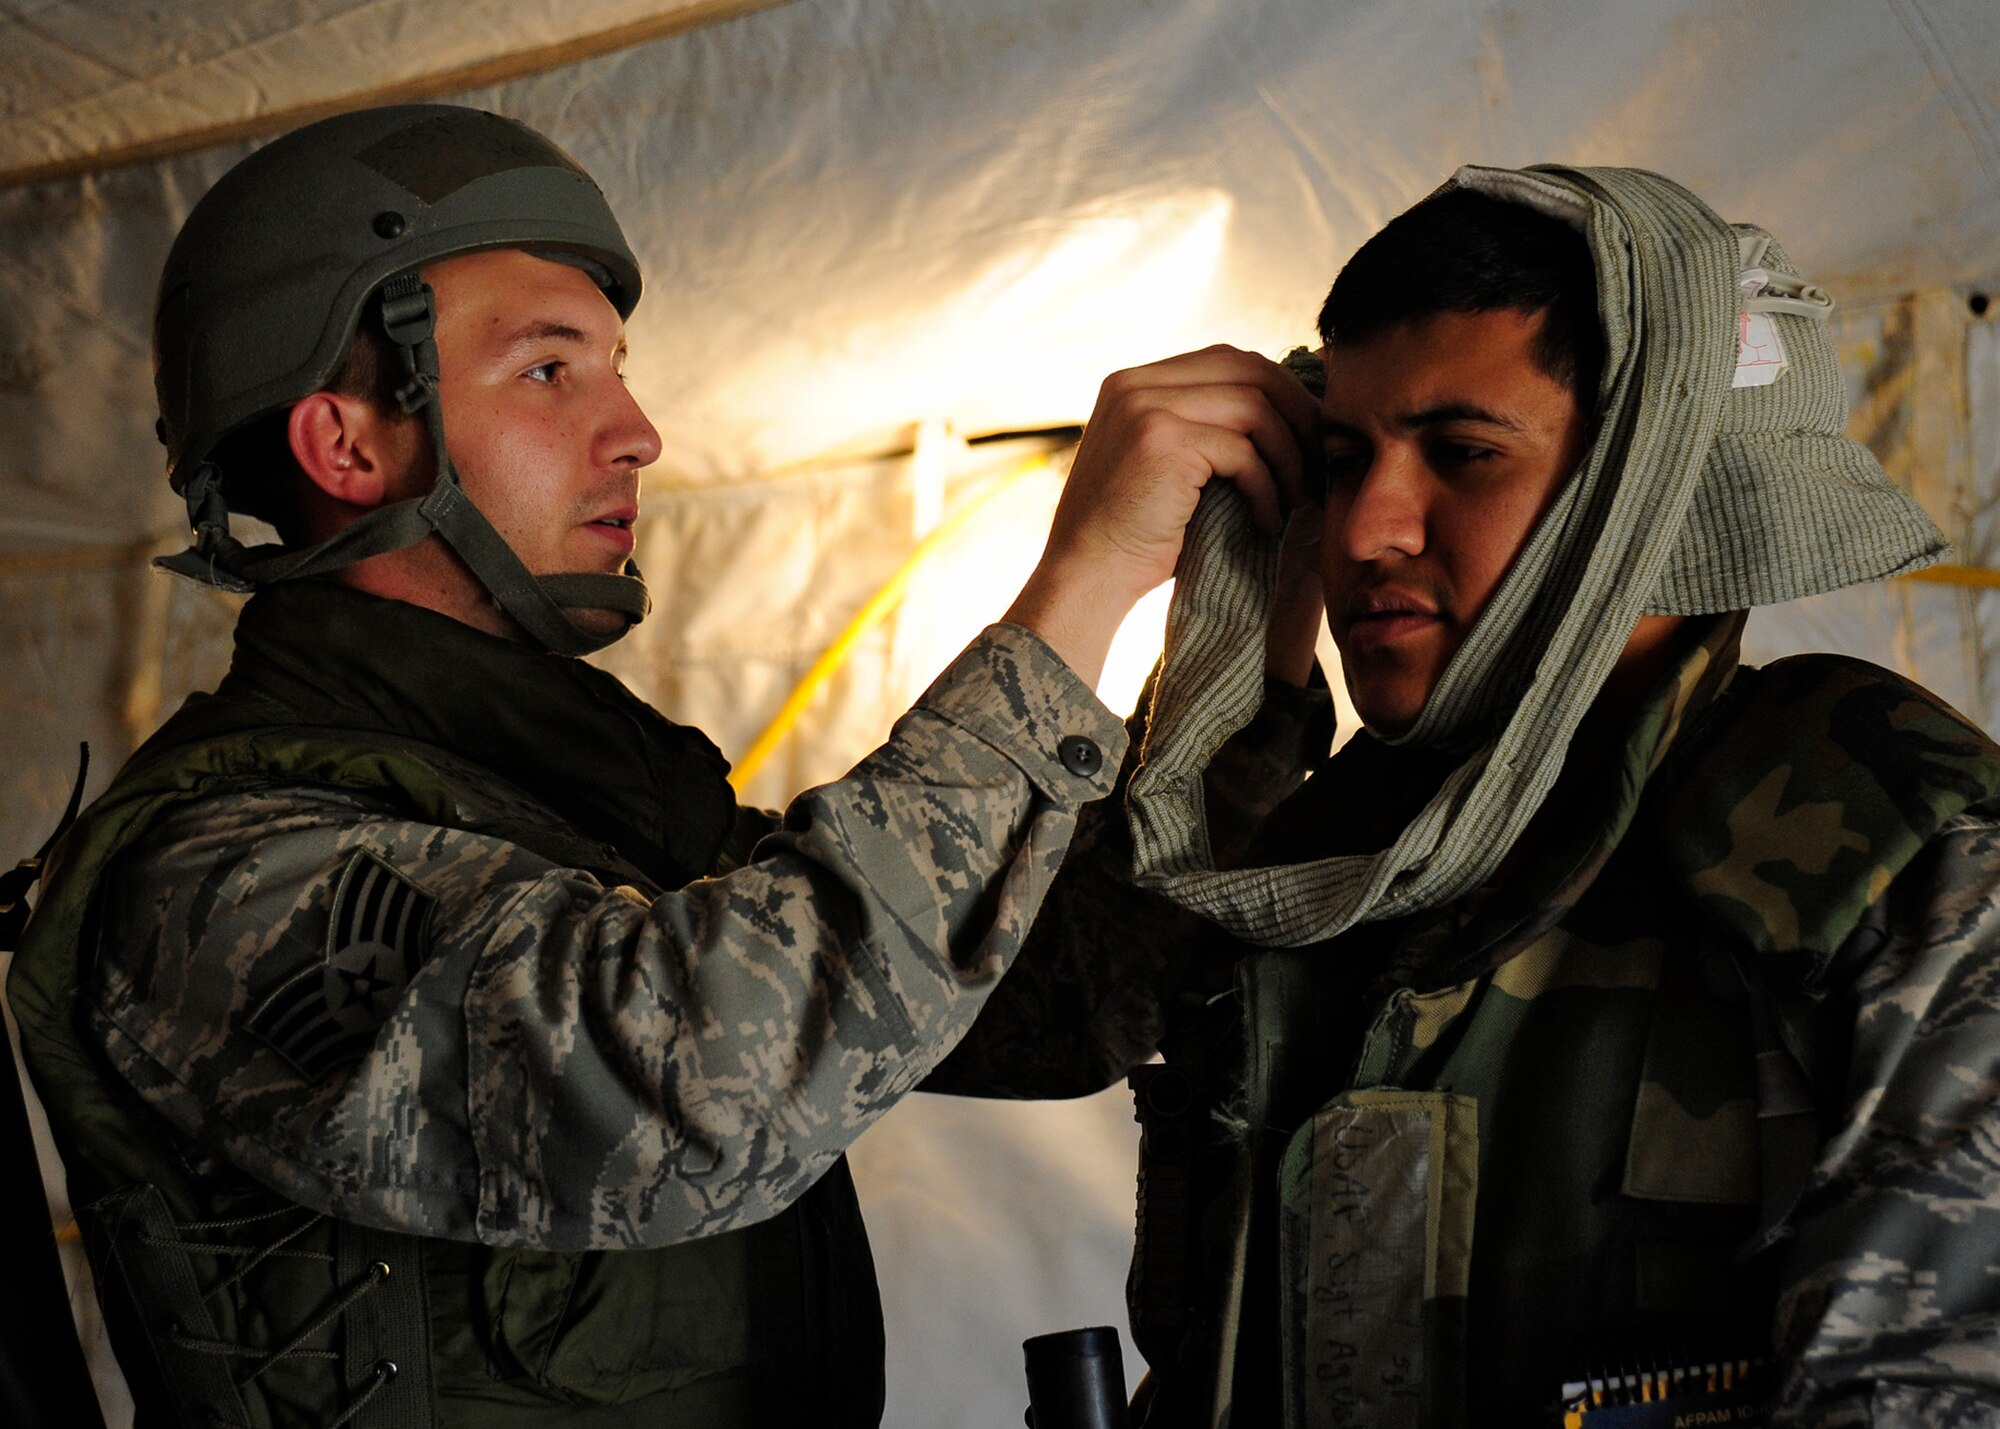 VANDENBERG AIR FORCE BASE, Calif. -- Staff Sgt. Steve Stanley , a 30th Logistic Readiness Squadron member, readies a head dressing on Staff Sgt. Augustin Aragon-Velazquez, a 30th Logistics Readiness Squadron member, as they prepare to evacuate Airmen wounded by a simulated mortar attack to the helicopter pickup area during the Northstar deployment exercise here Thursday, August 9, 2012. (U.S. Air Force photo/Michael Peterson)